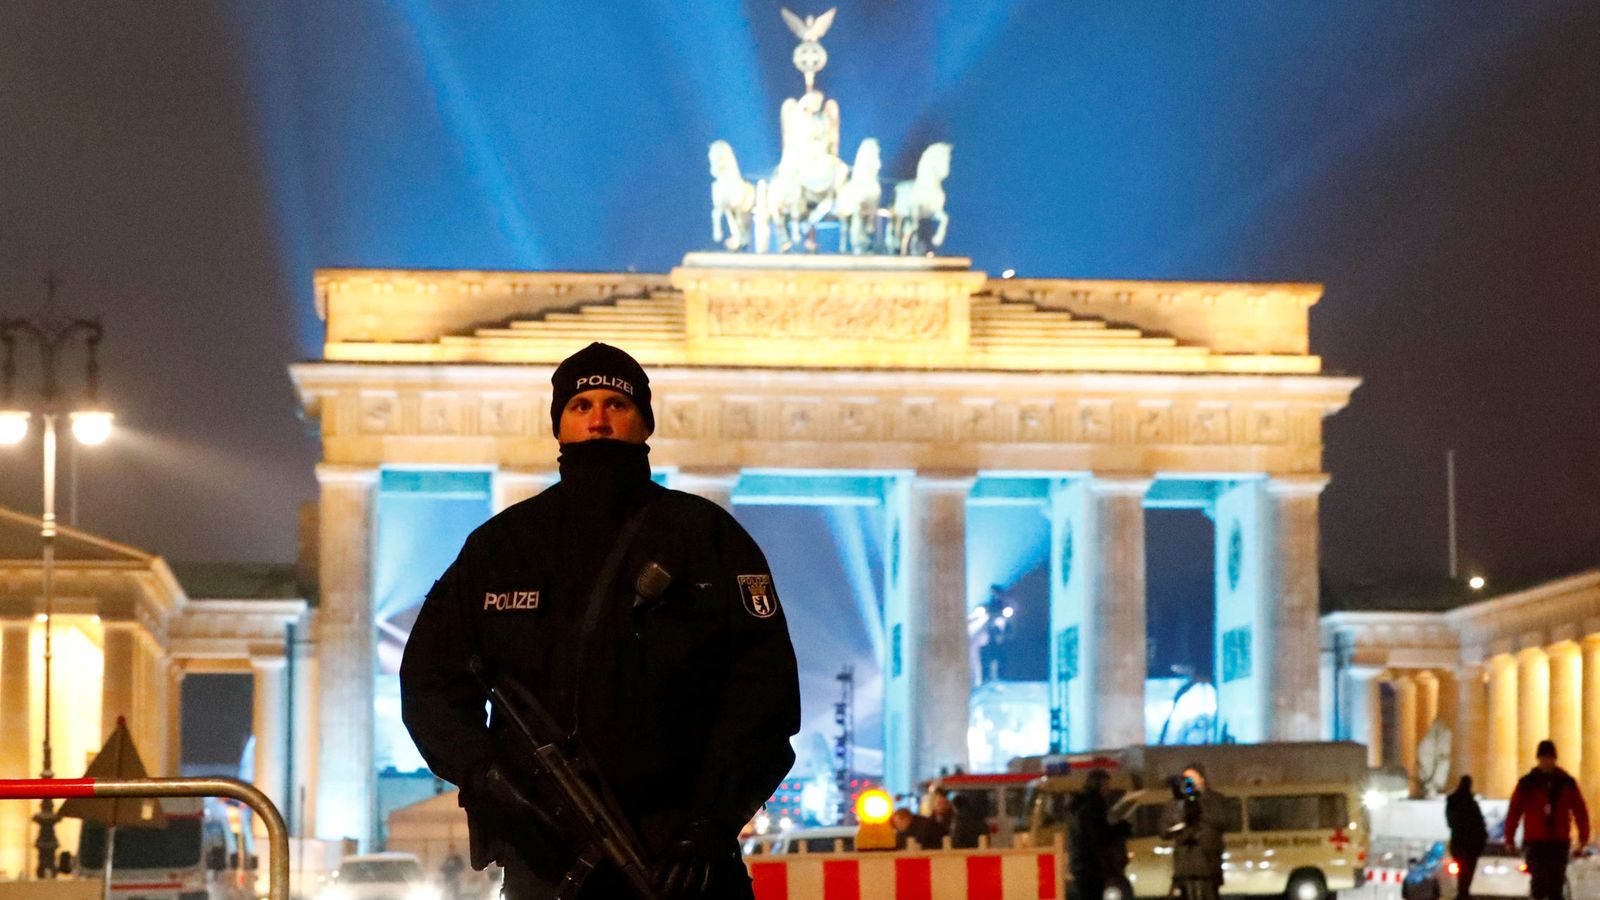 Foto: A german police man guards the venue at the brandenburg gate during the upcoming new year's eve celebrations in berlin